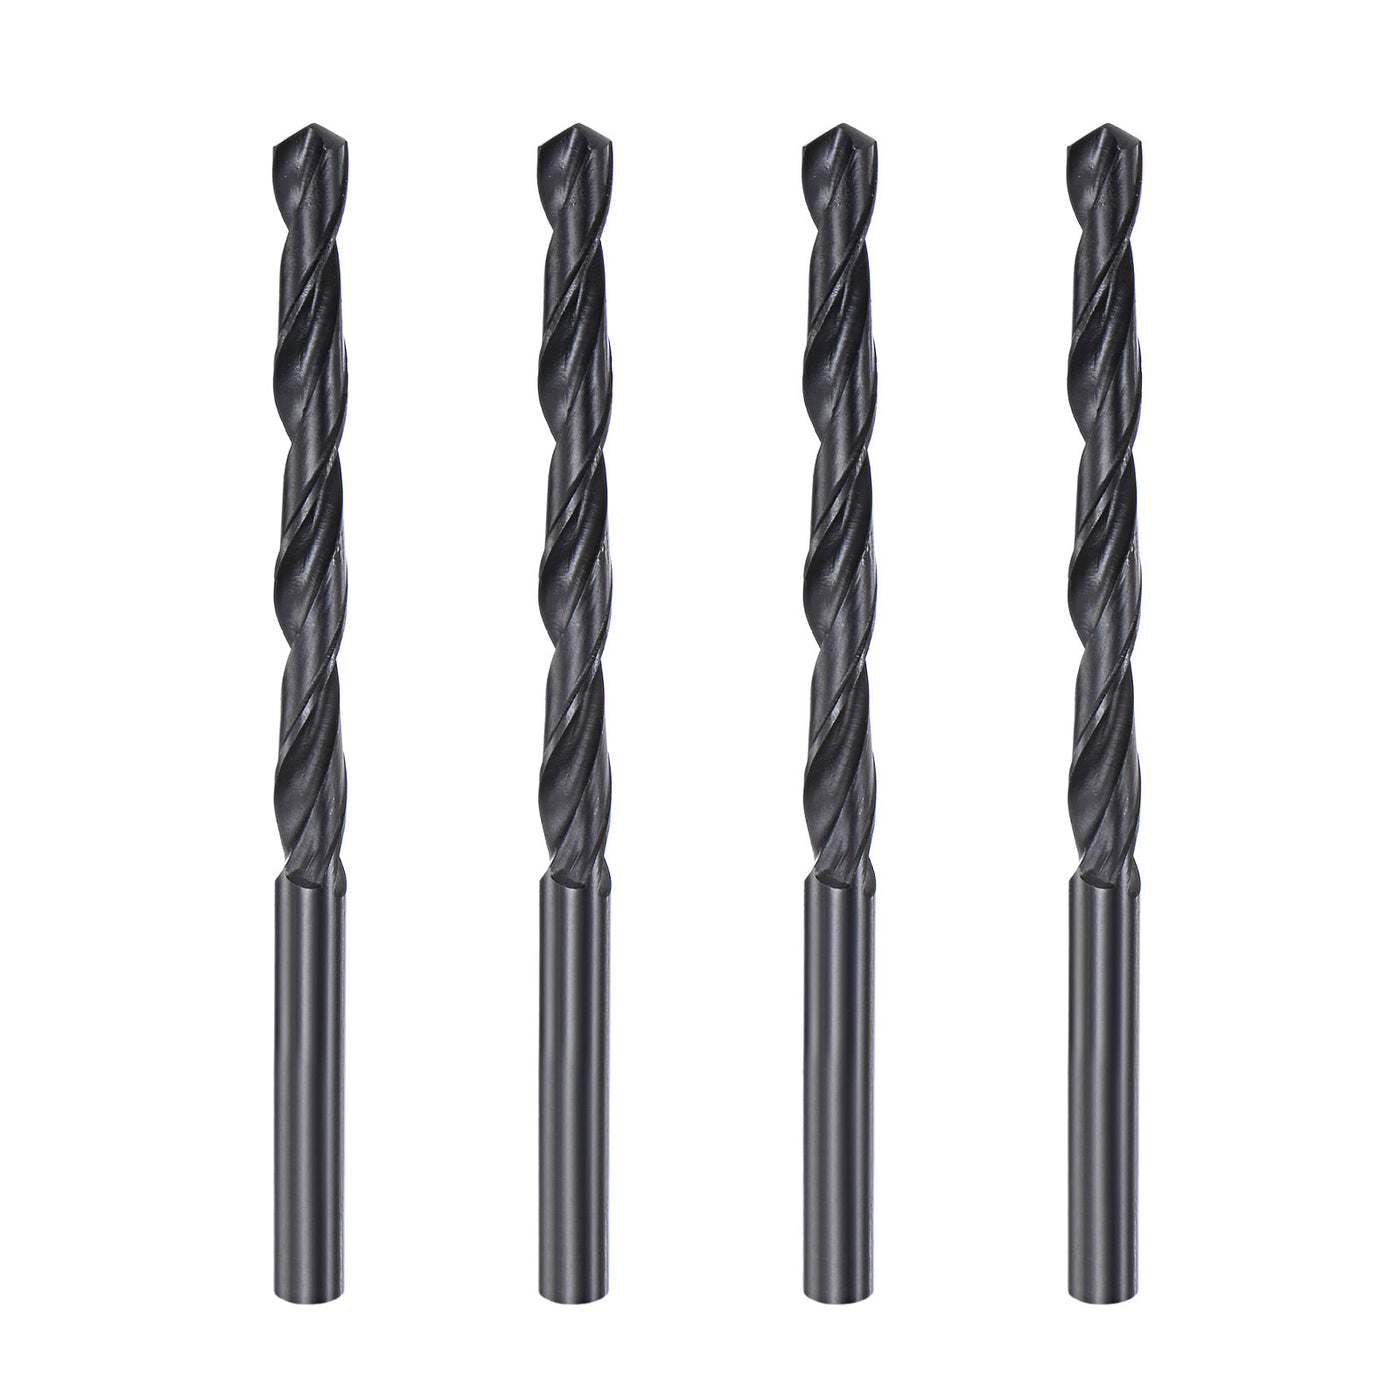 uxcell Uxcell High Speed Steel Twist Drill Bit, 5.6mm Fully Ground Black Oxide 93mm Long 4Pcs